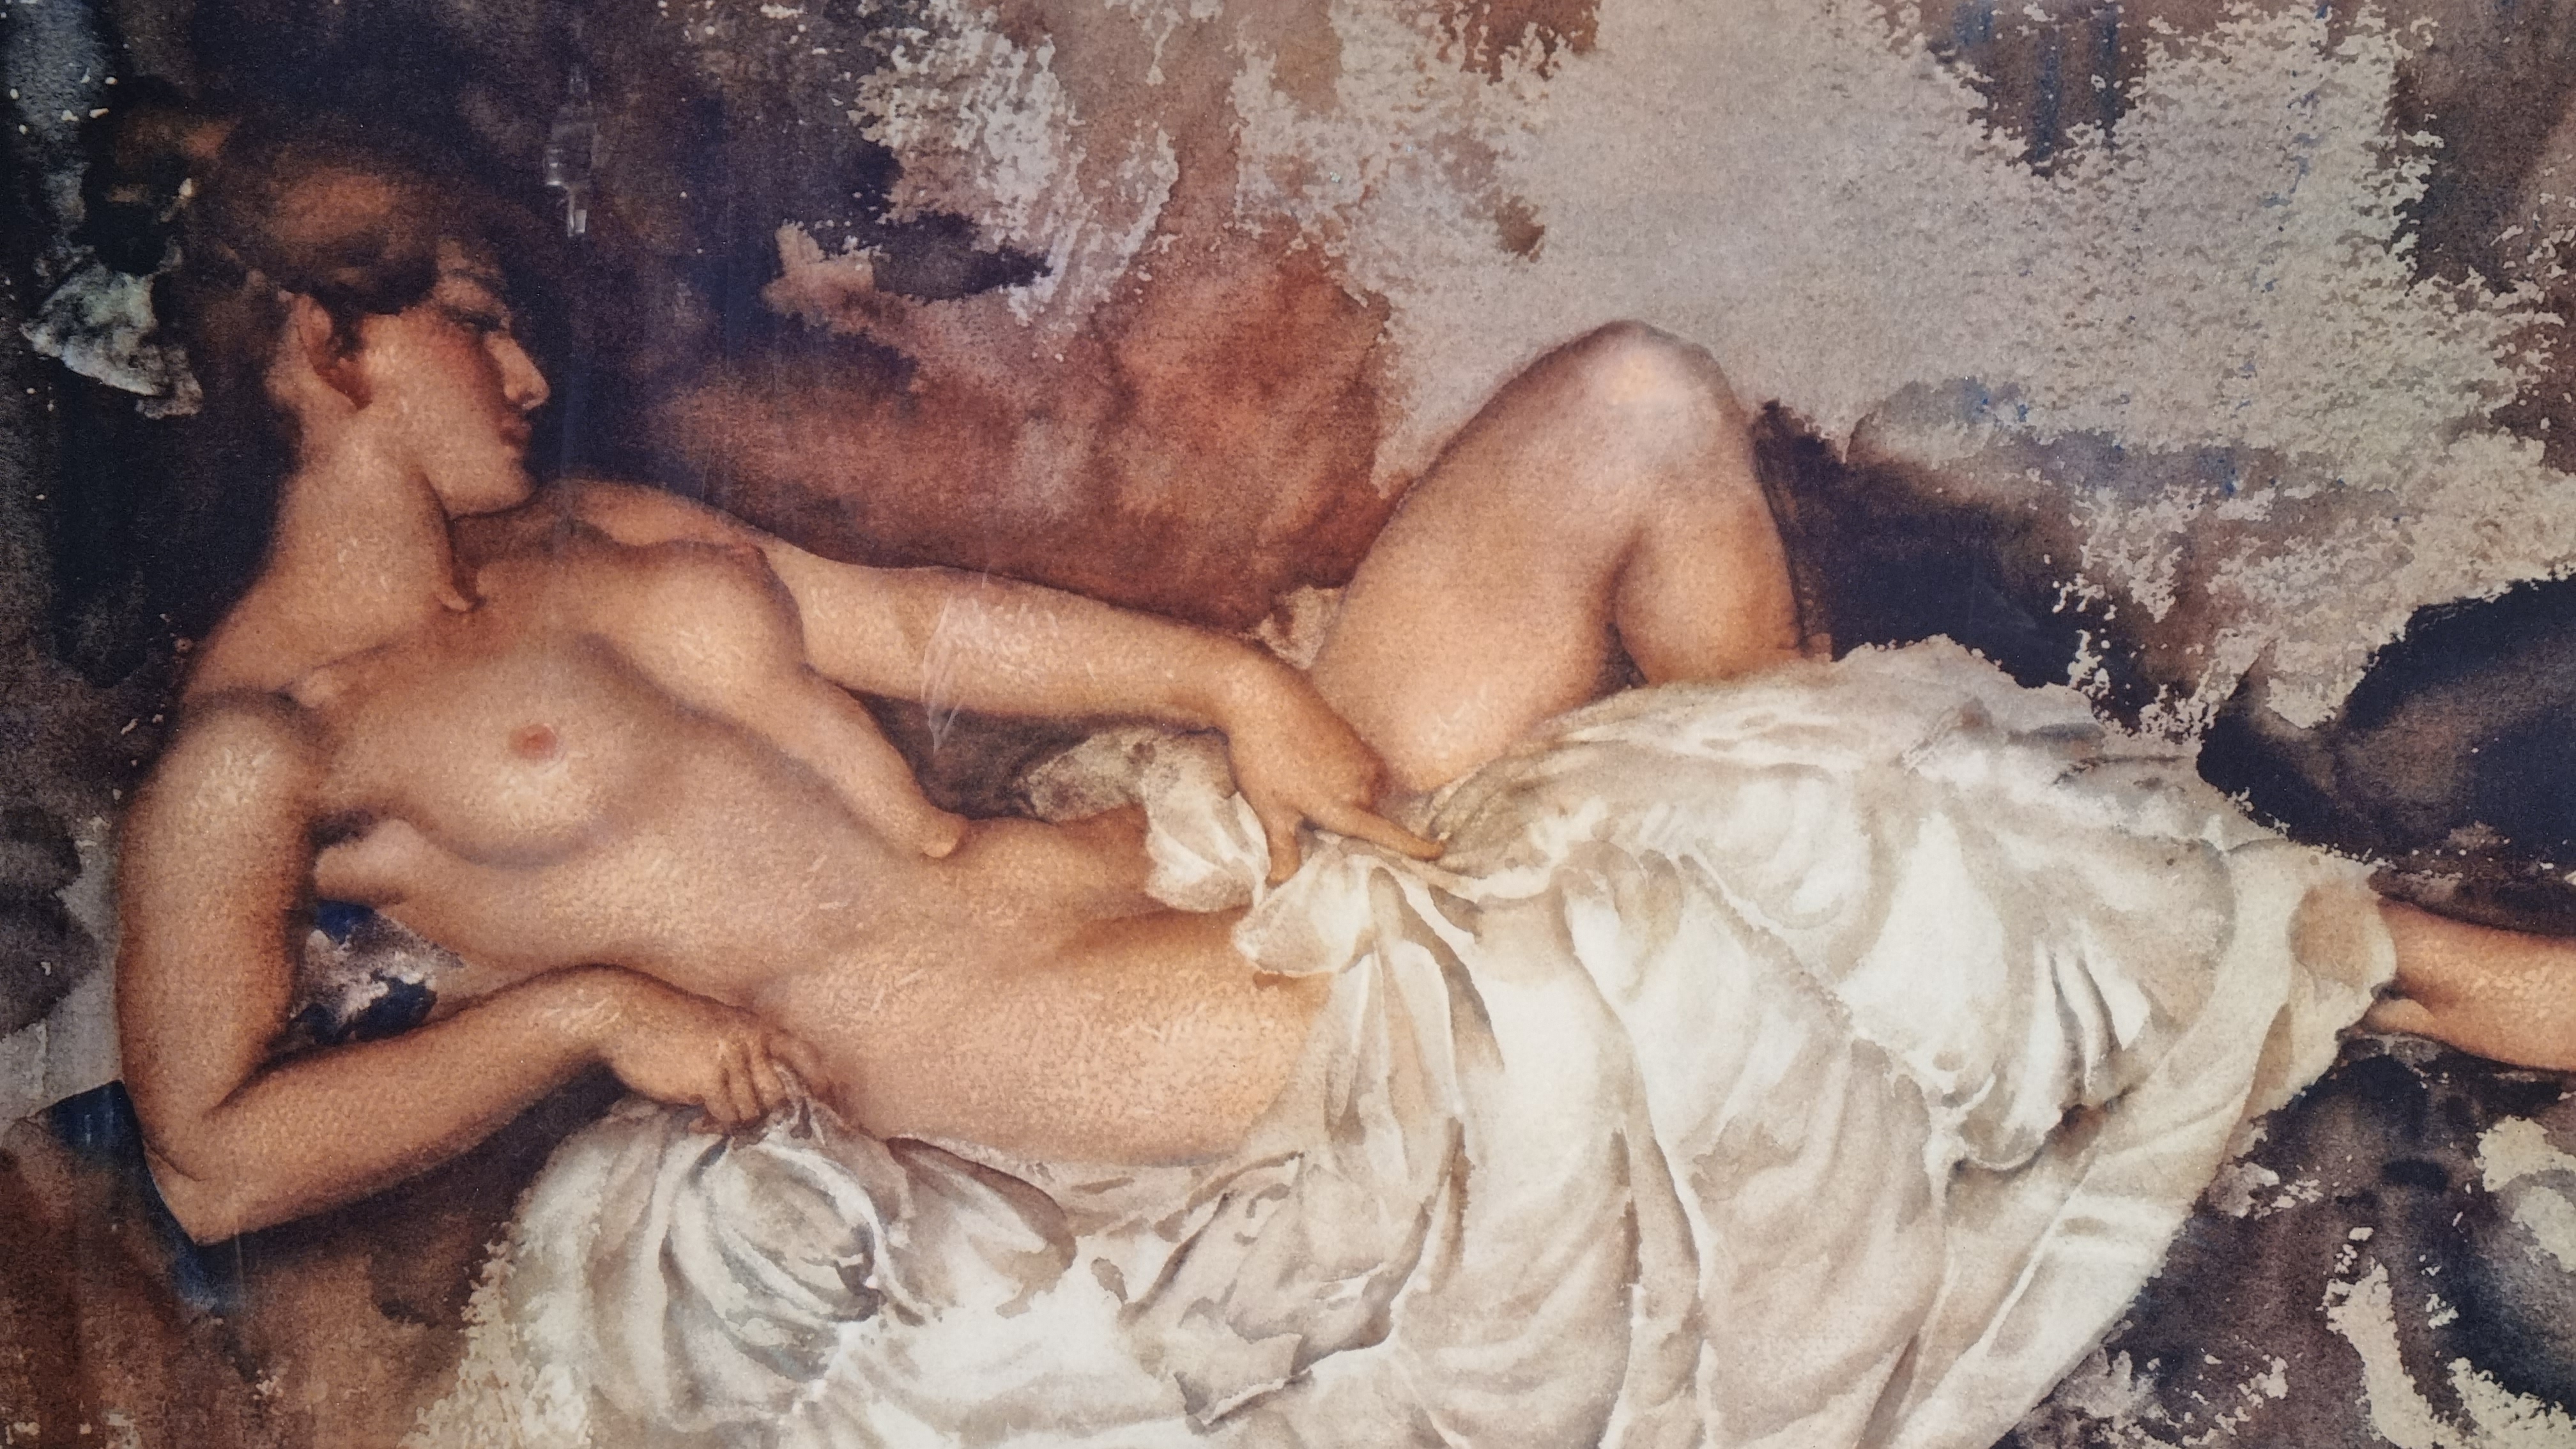 Russell Flint Limited Edition "Reclining Nude" With Rare Book. - Image 7 of 10